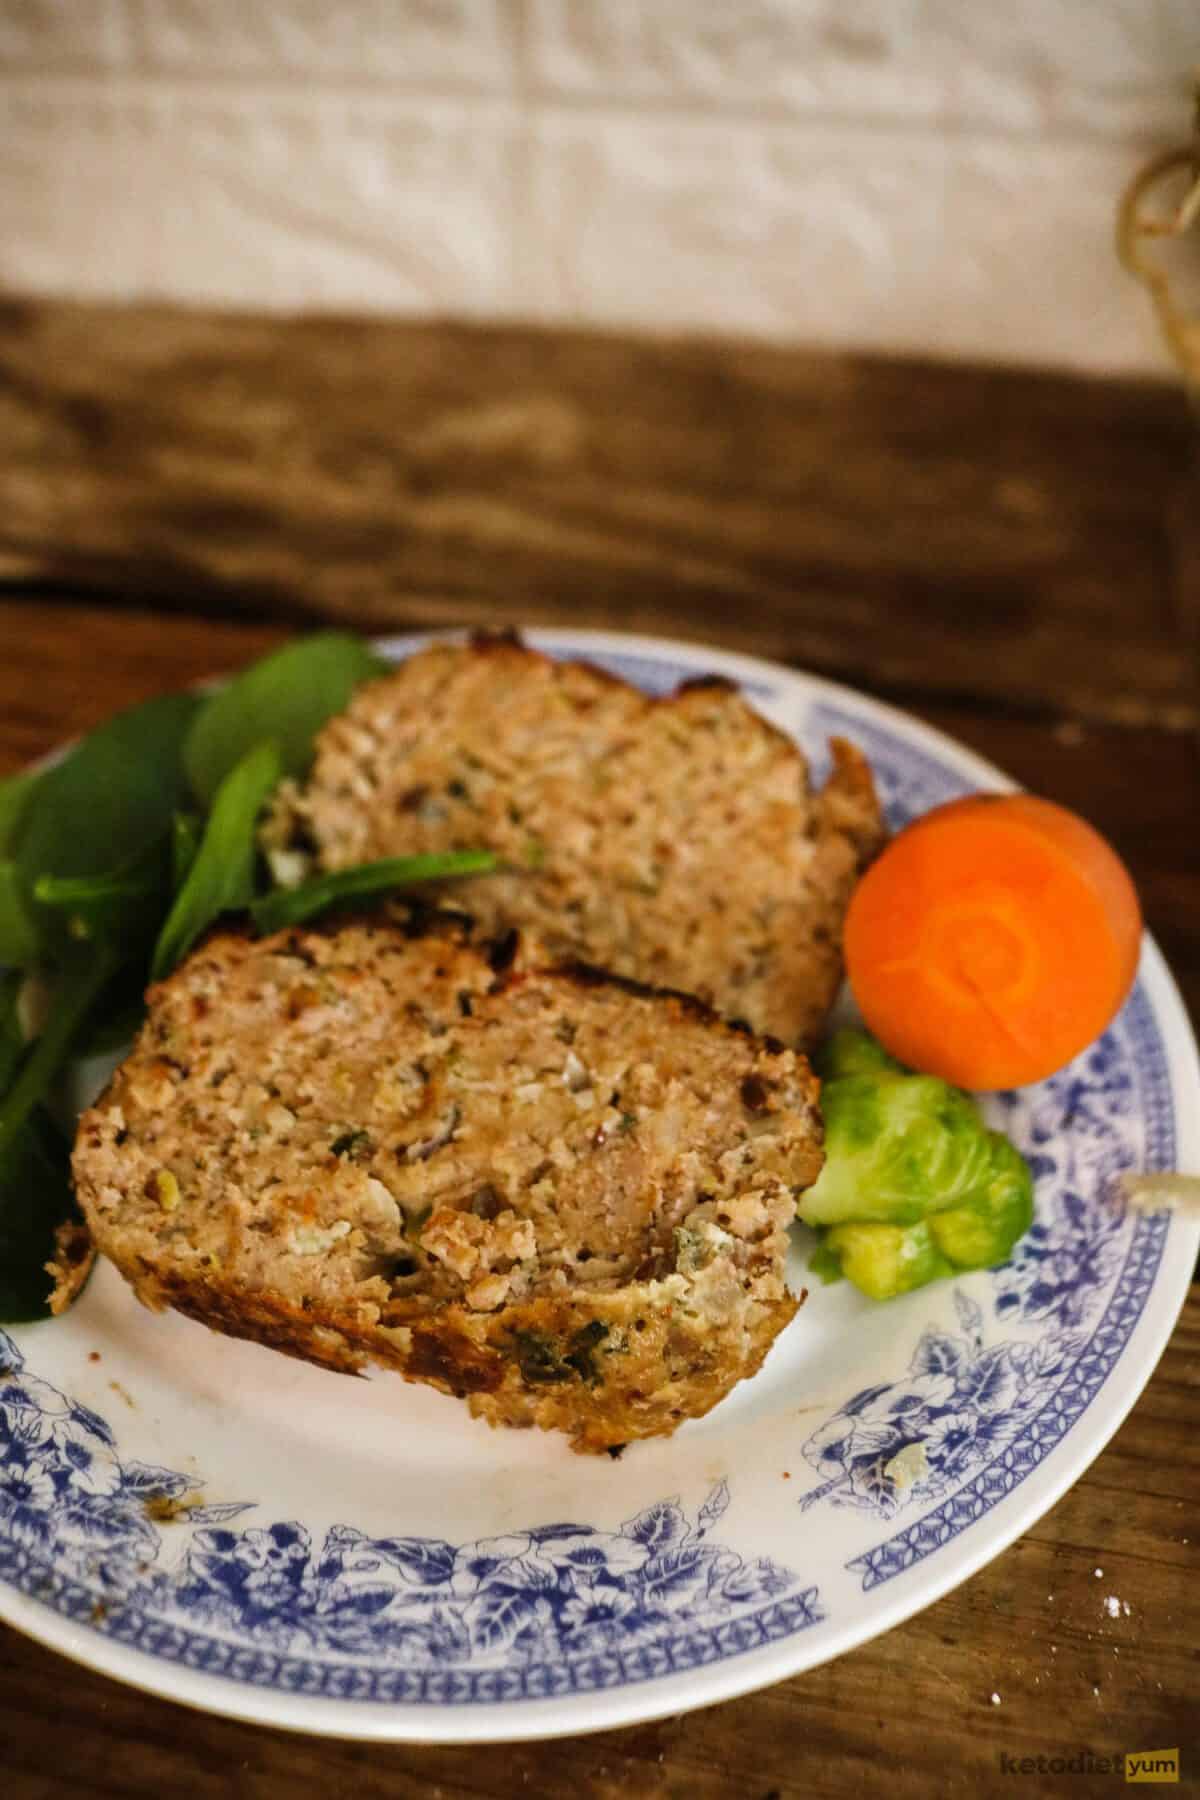 Two slices of meatloaf on a plate with spinach, carrot and broccoli